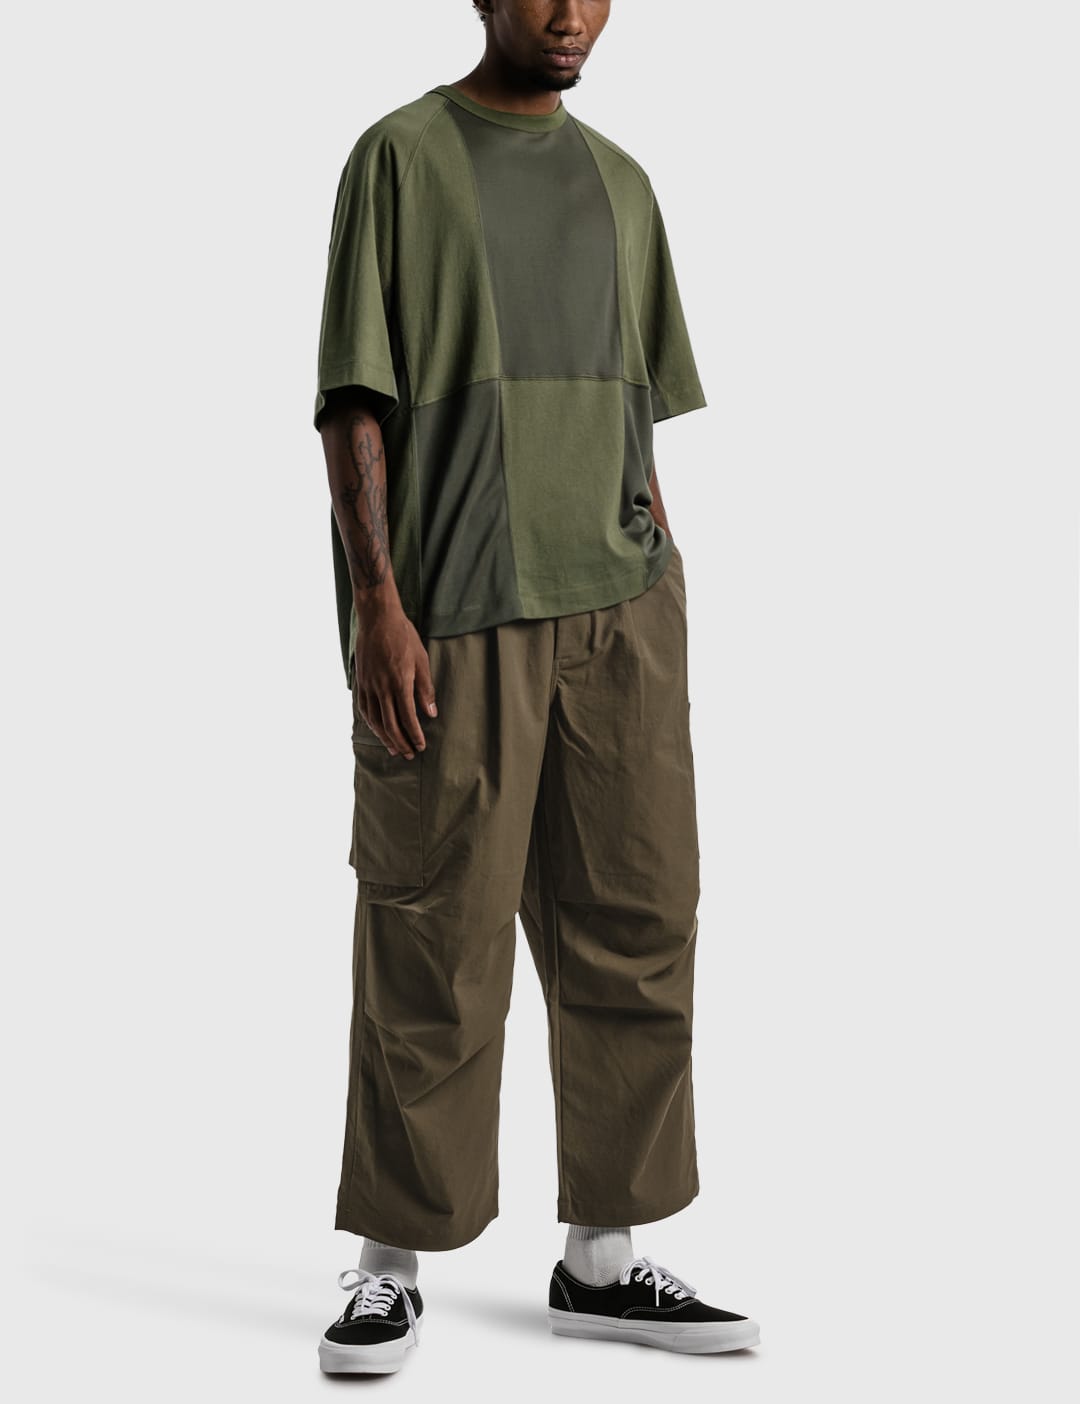 TIGHTBOOTH   Tech Twill Cargo Pants   HBX   Globally Curated